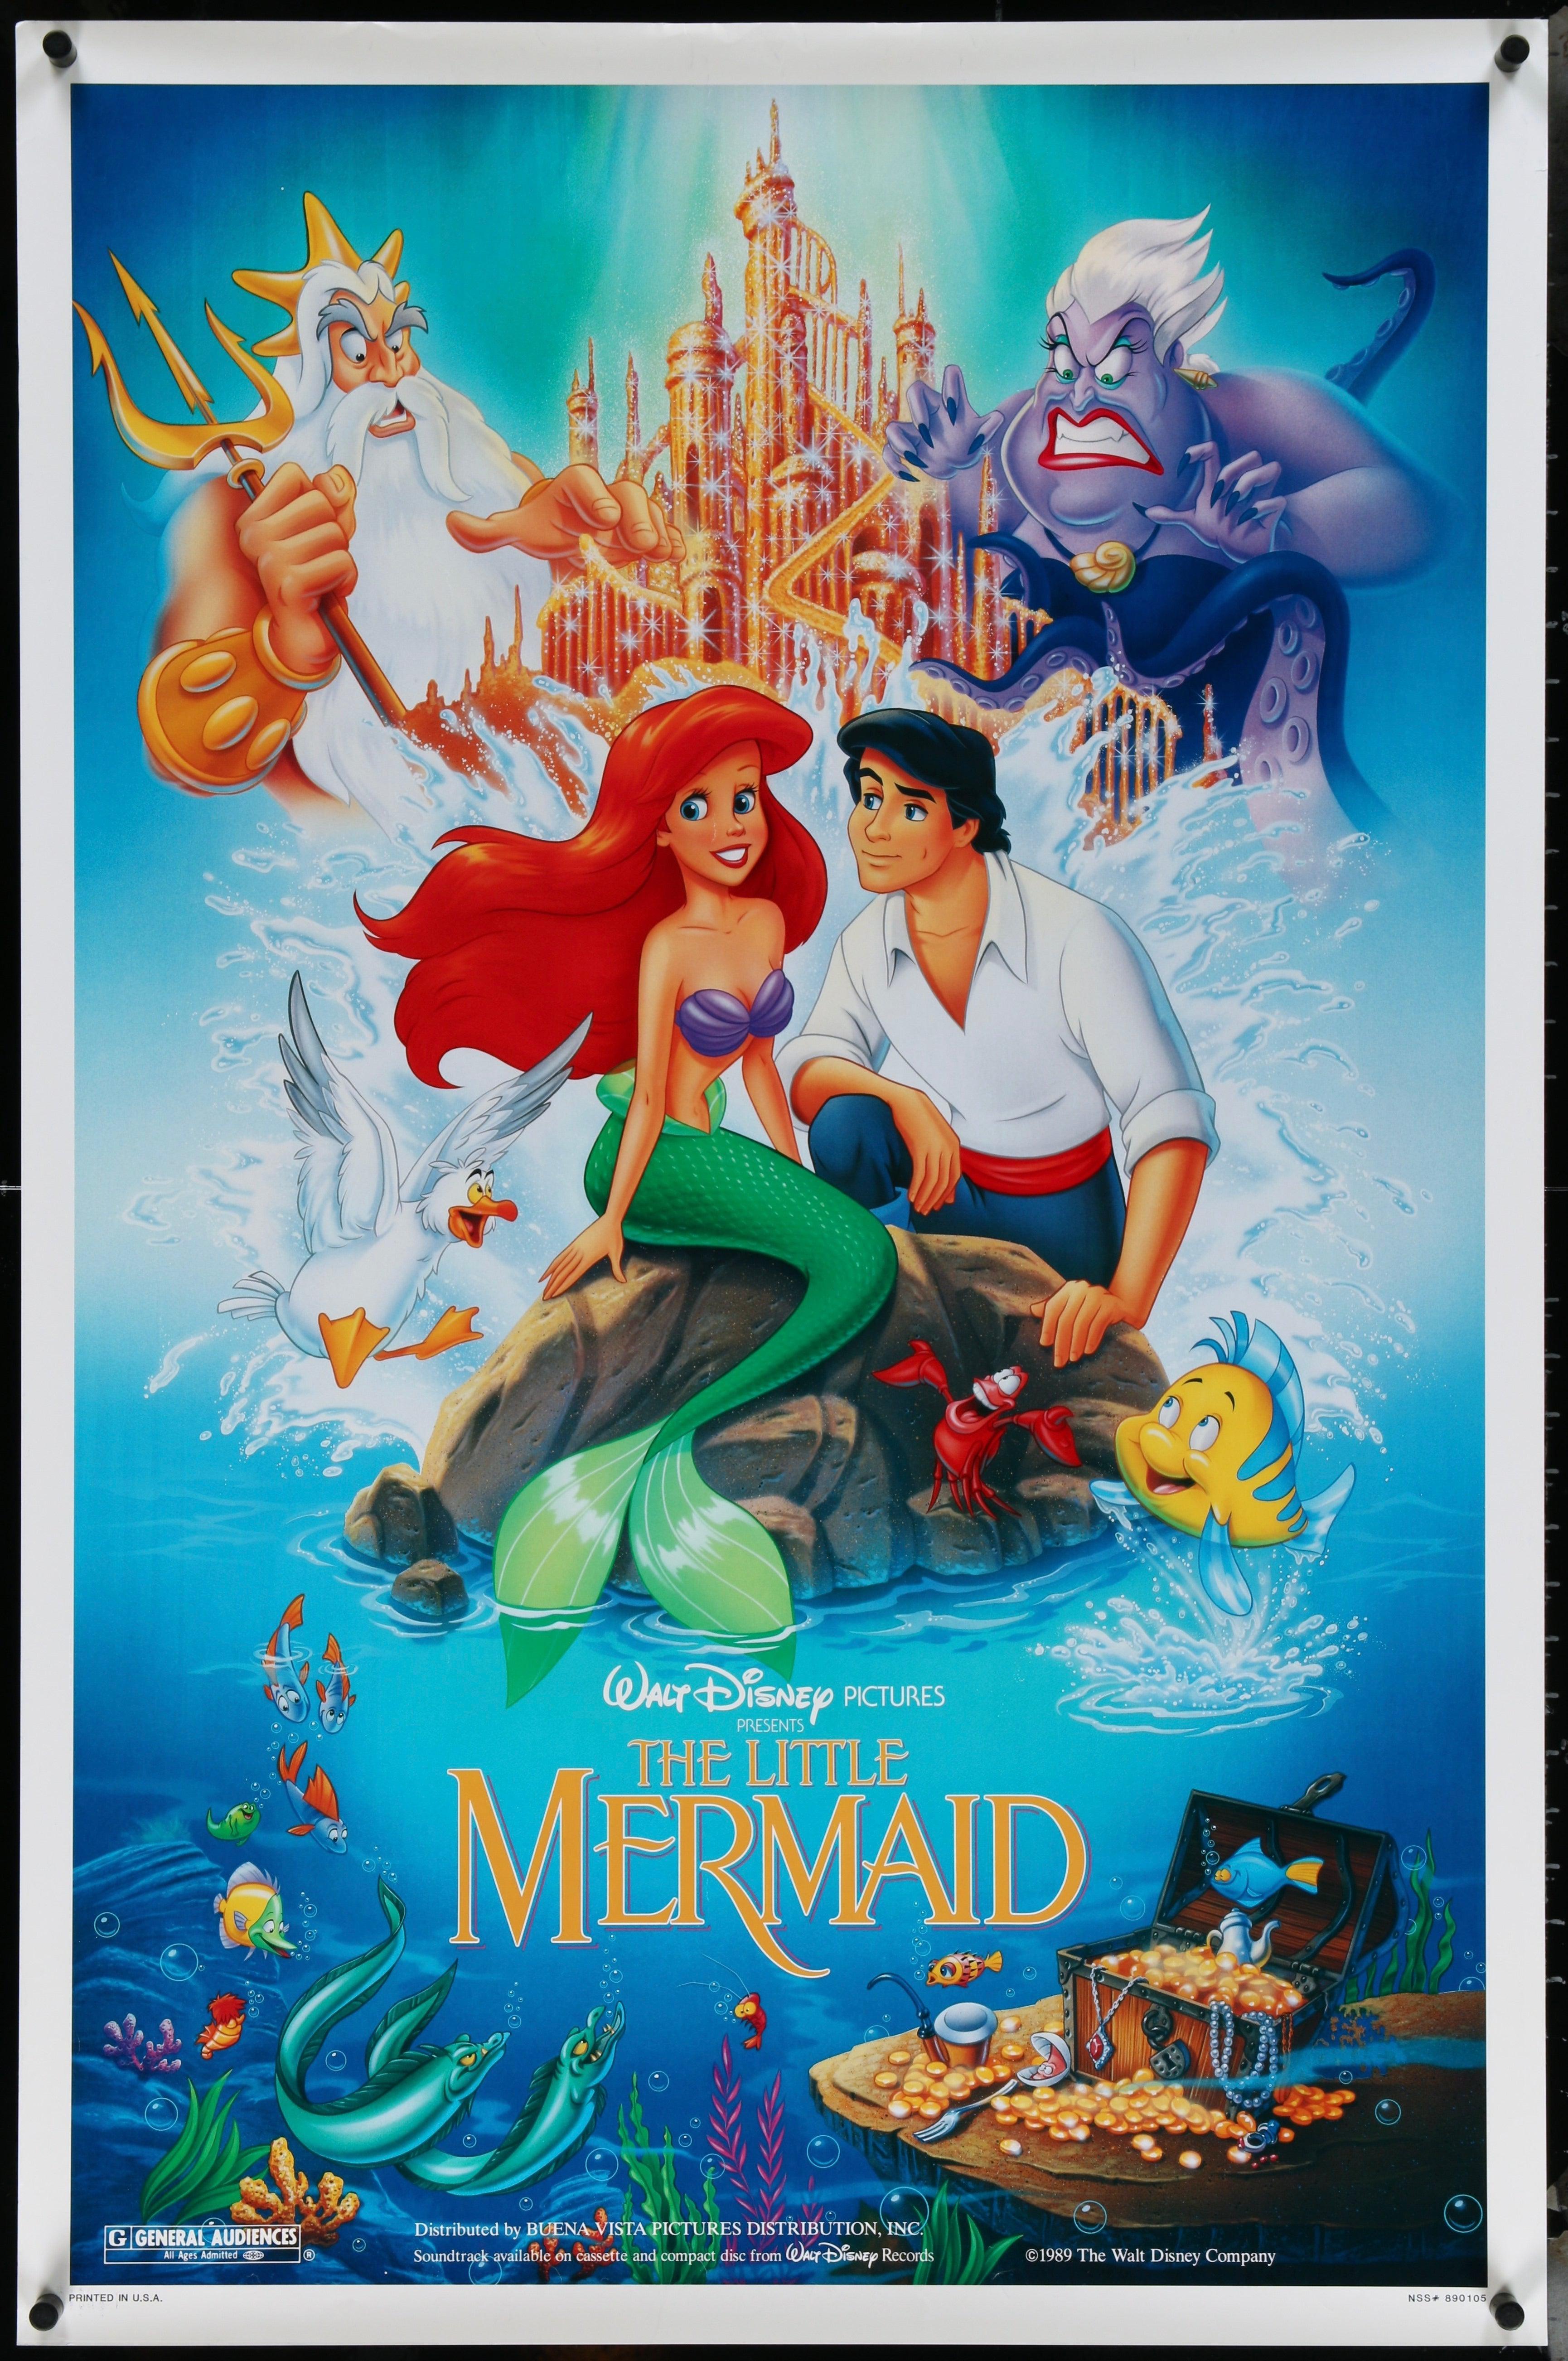 The Little Mermaid Movie Poster 1989 1 Sheet (27x41)